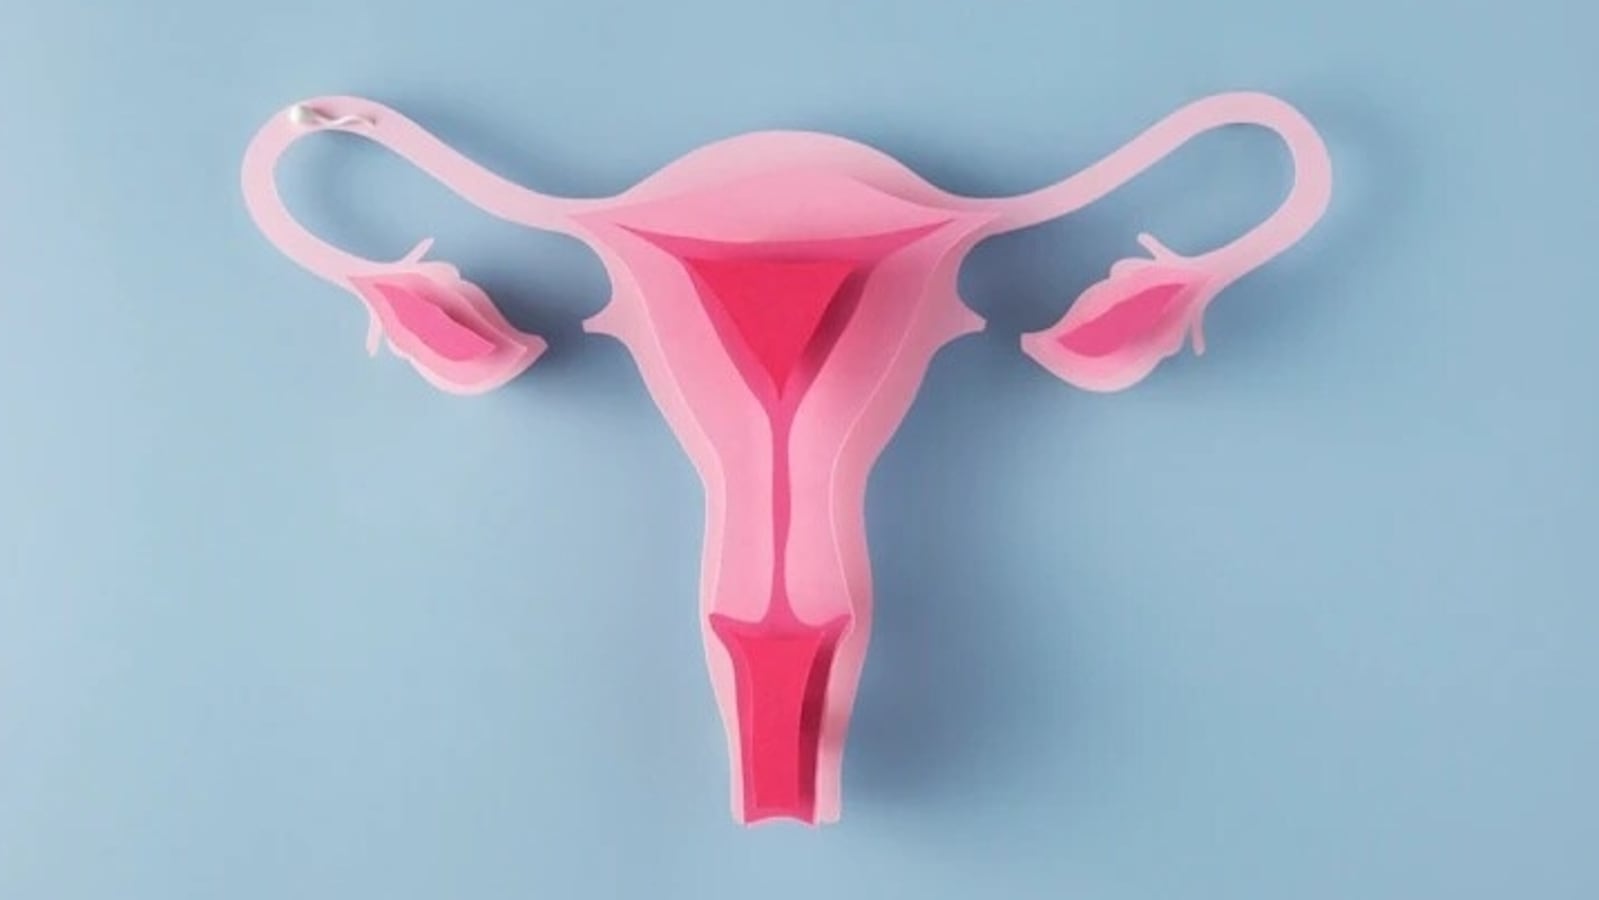 Ovarian Cyst Symptoms: How They Develop, How to Treat Them